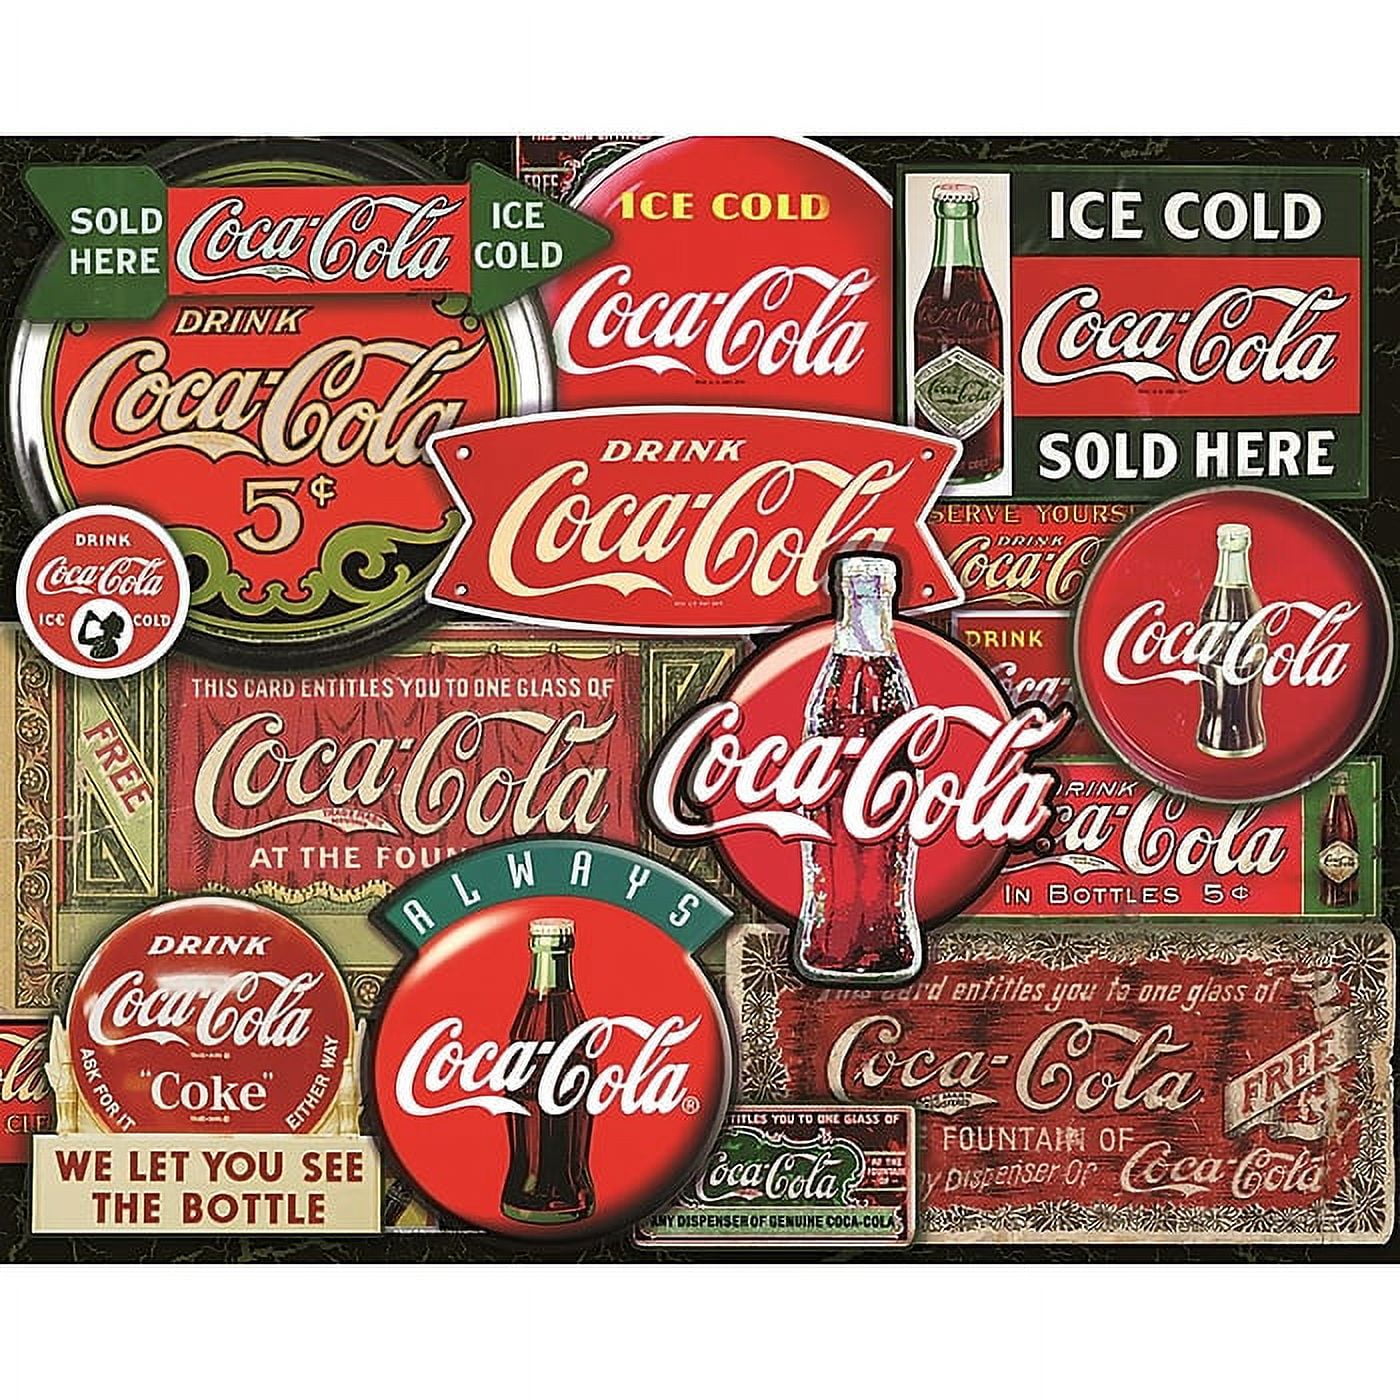 Coca-Cola Classic Signs 1000 Piece Jigsaw Puzzle 